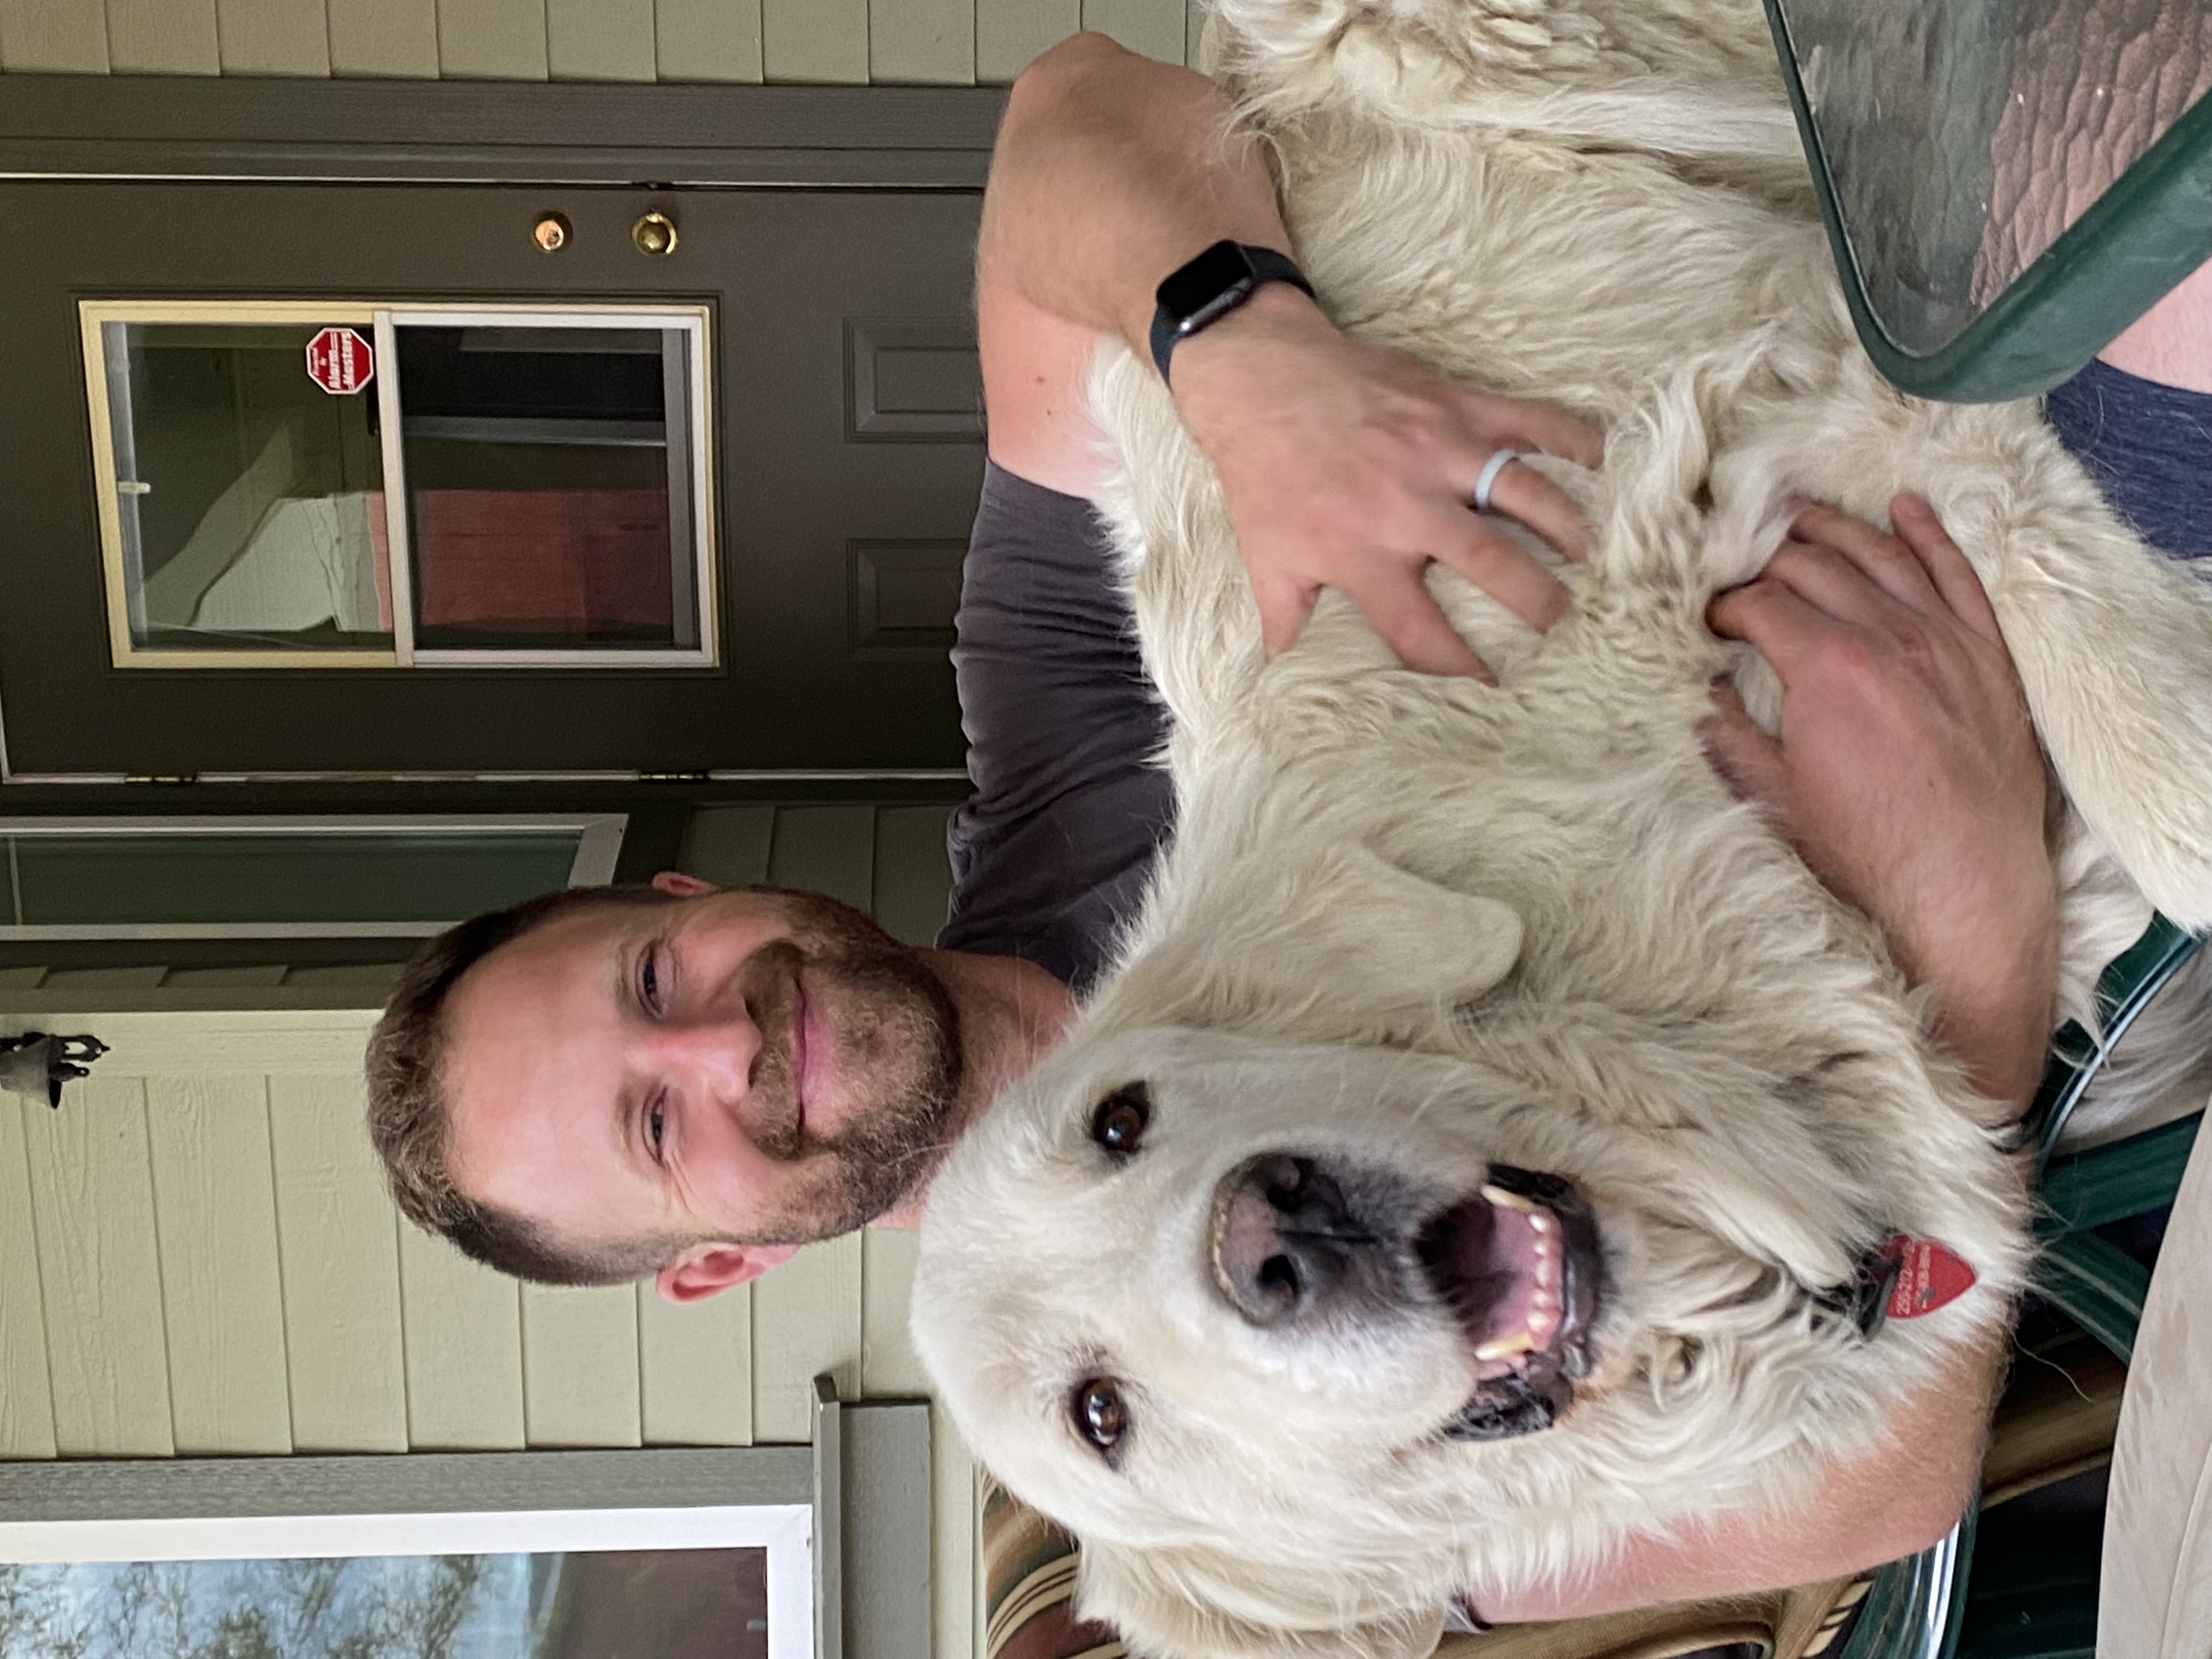 A person with a beard sits hugging a big white furry dog on his lap in front of a door.